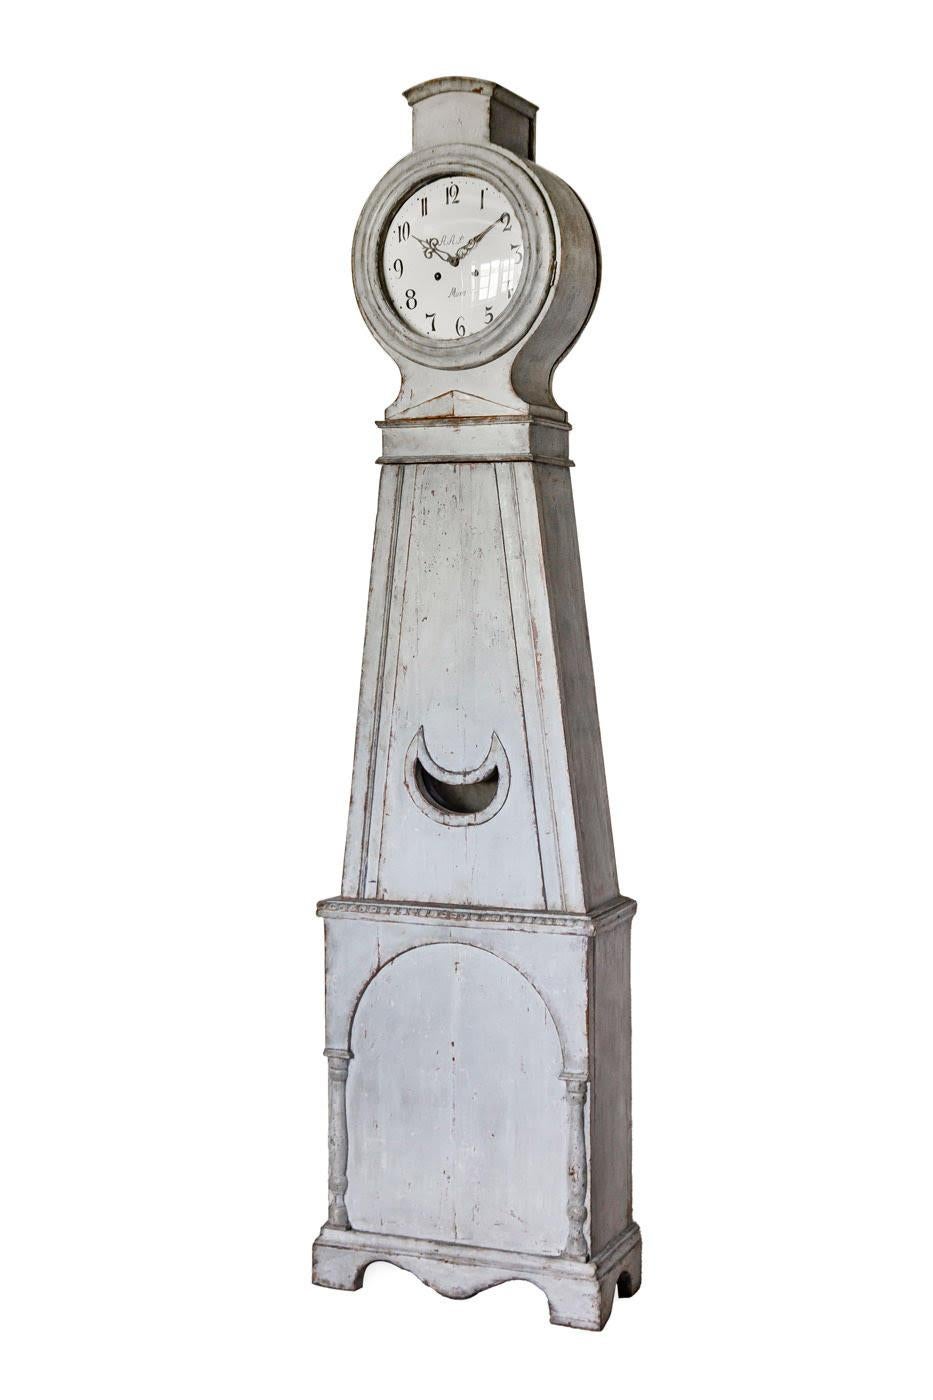 Decorative Early 1800s antique Swedish mora clock with simple detail on the hood in a white grey blue paint finish with a AAS numeral face in good condition for its age.

Measures: 207cm.

This original 1800s mora clock has a nice face and features